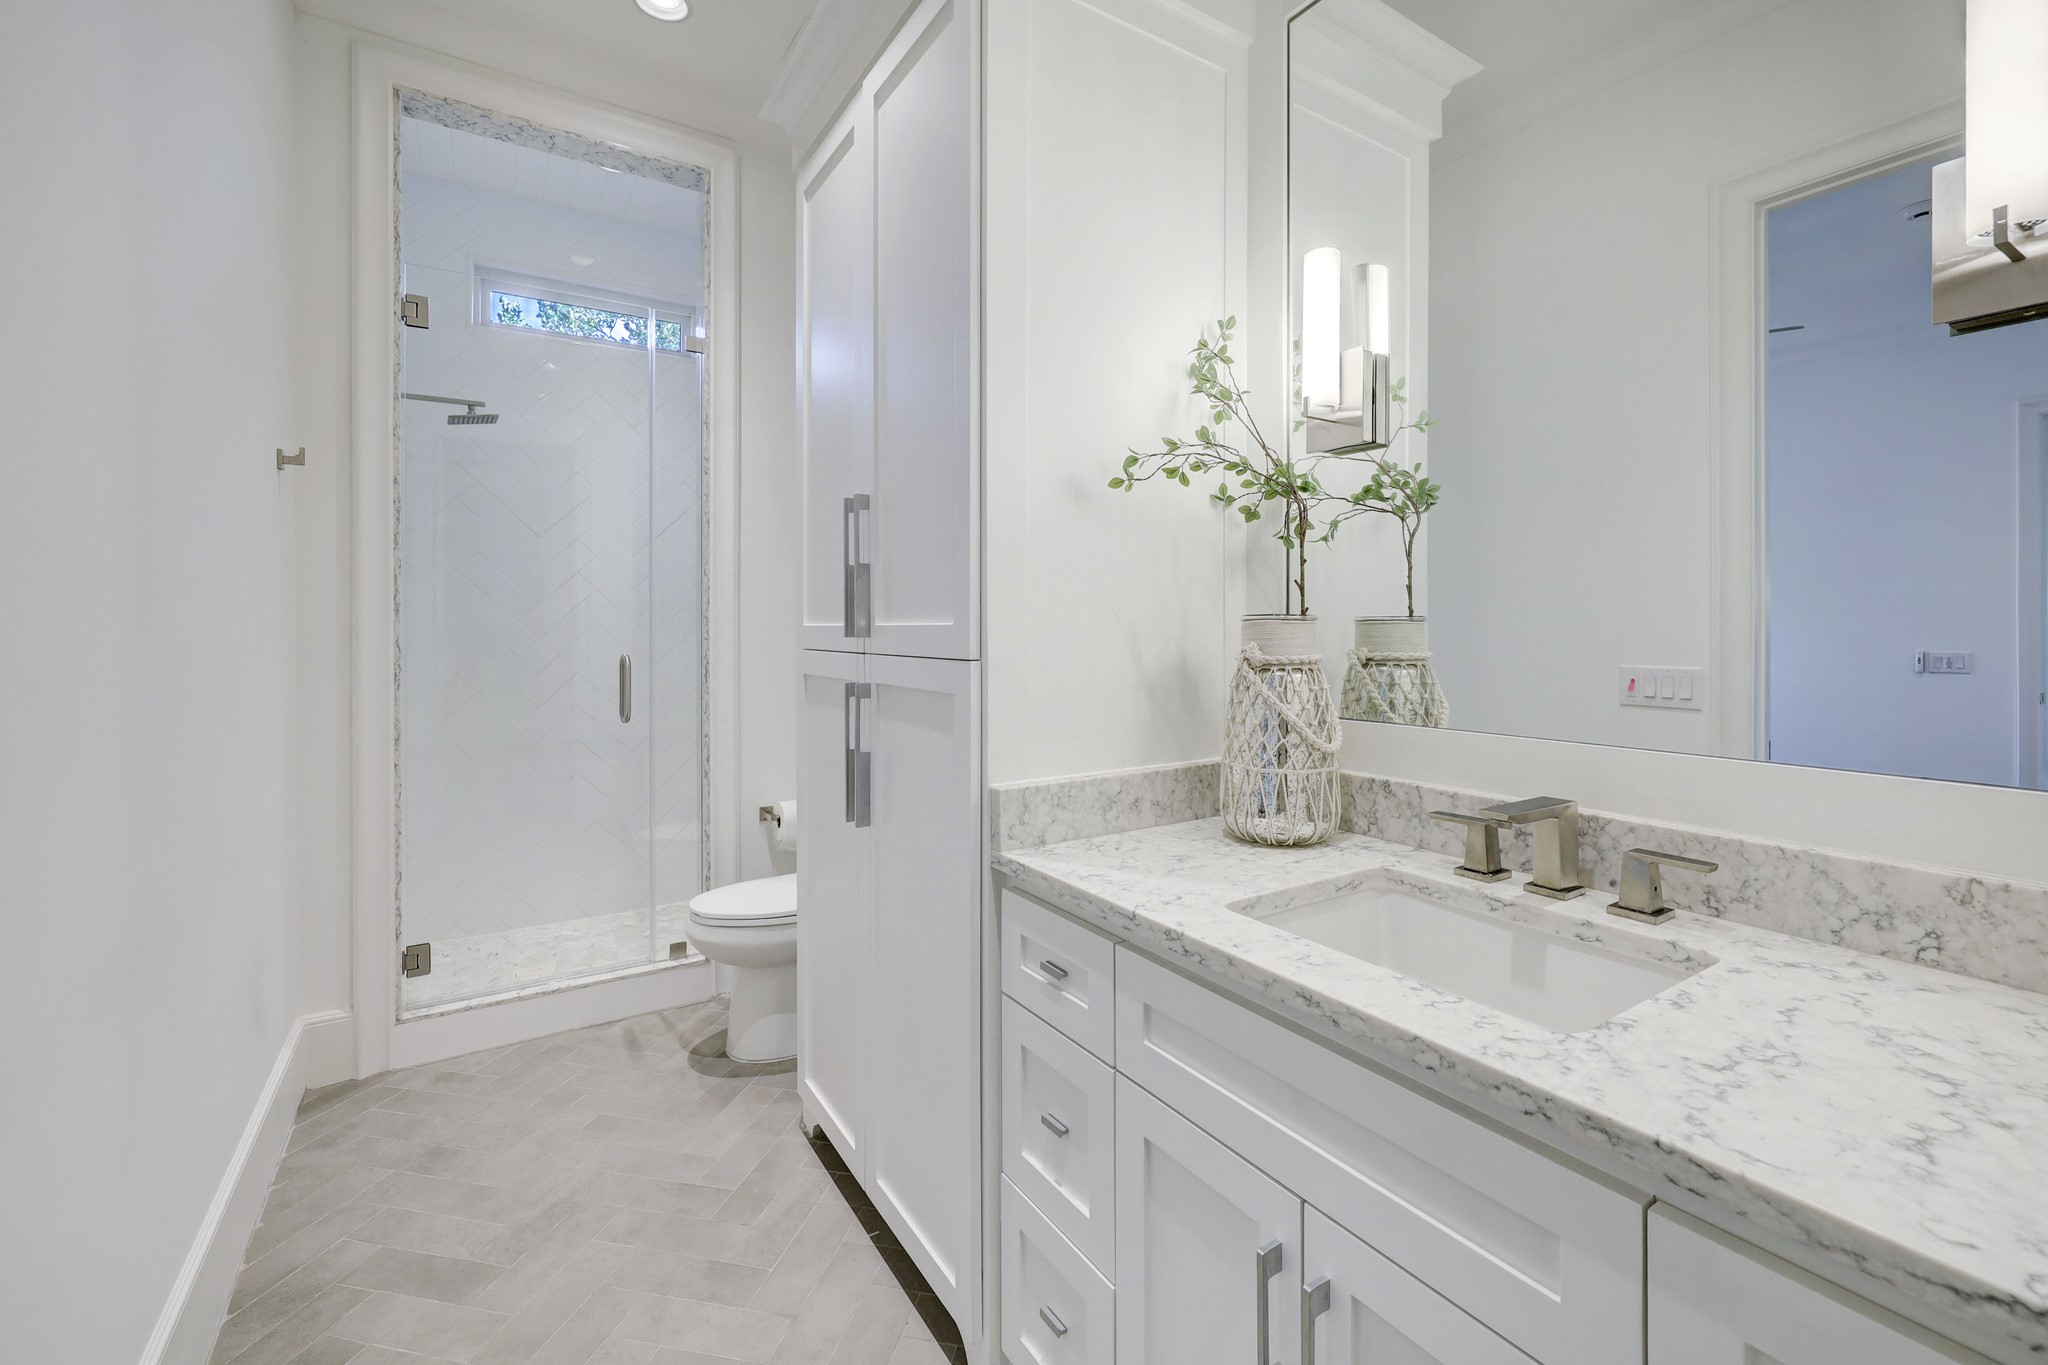 Generously sized guest
bathroom with attractive
herringbone pattern accent tile in shower, transom windows to
allow natural light, and large linen cabinet.